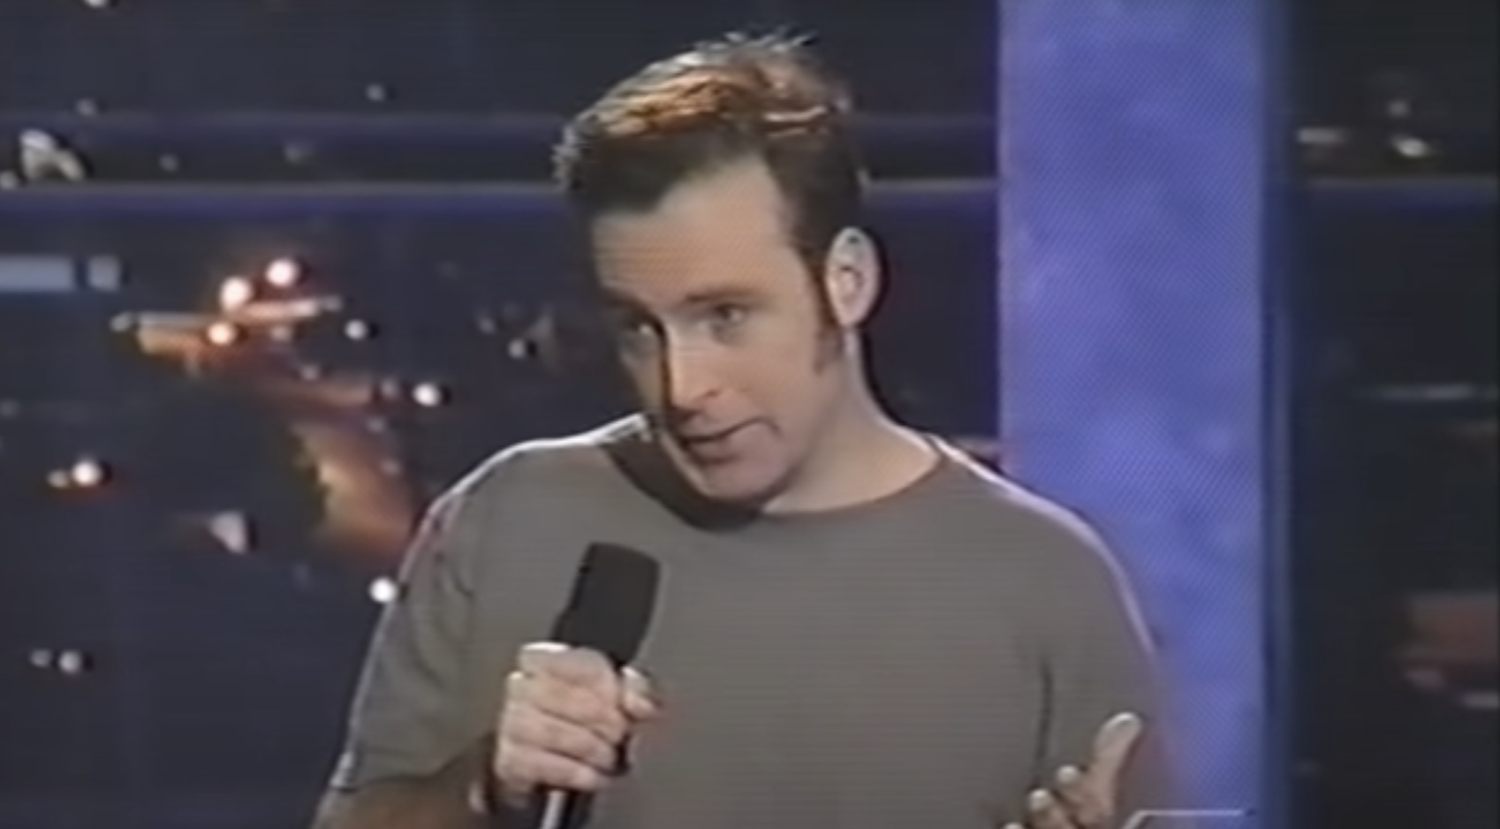 Enjoy Some Bob Odenkirk Stand-Up Comedy From 1997.